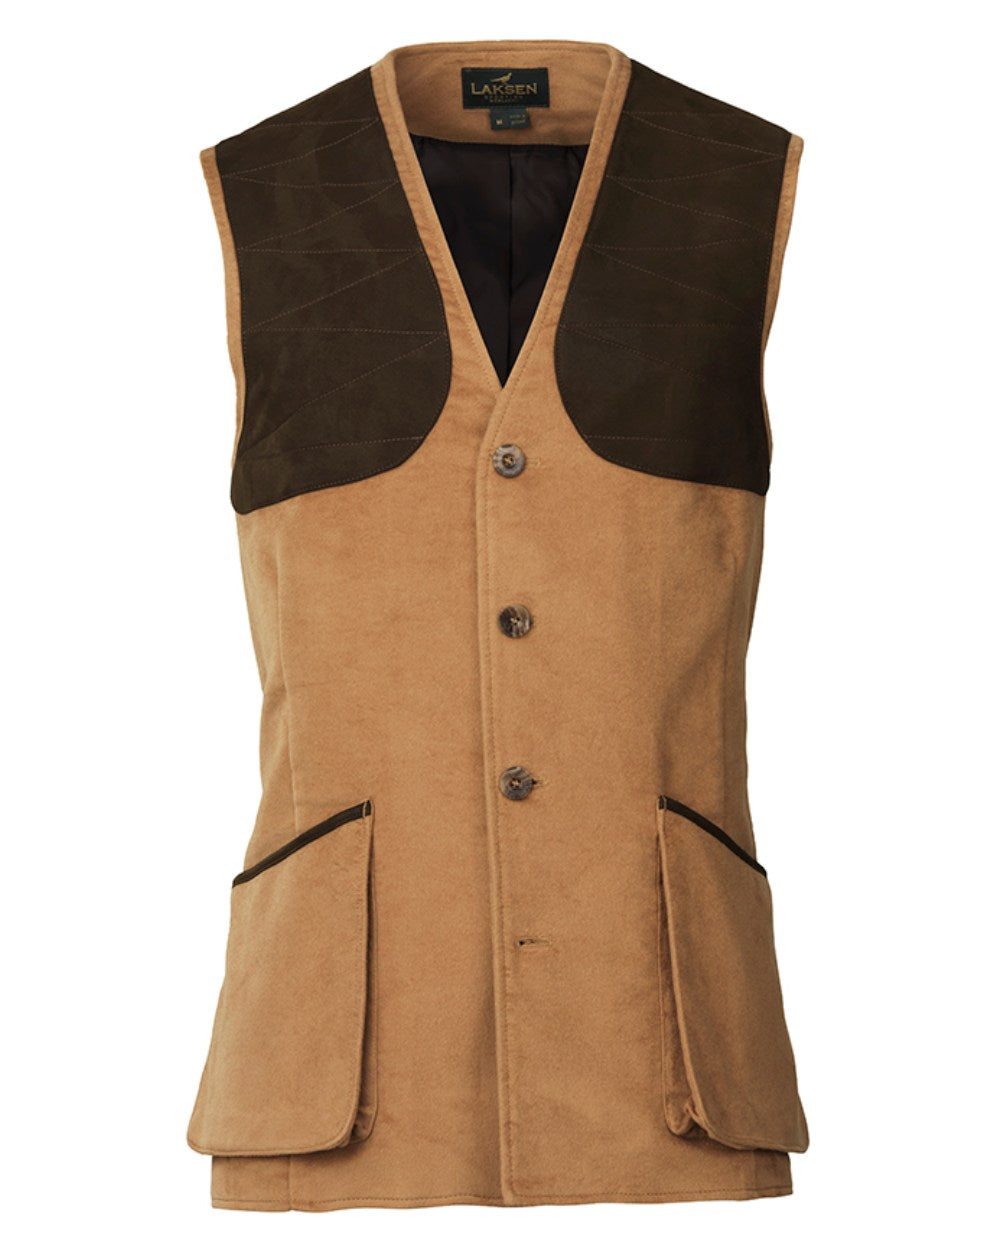 Camel Coloured Laksen Belgravia Leith Shooting Vest On A White Background 